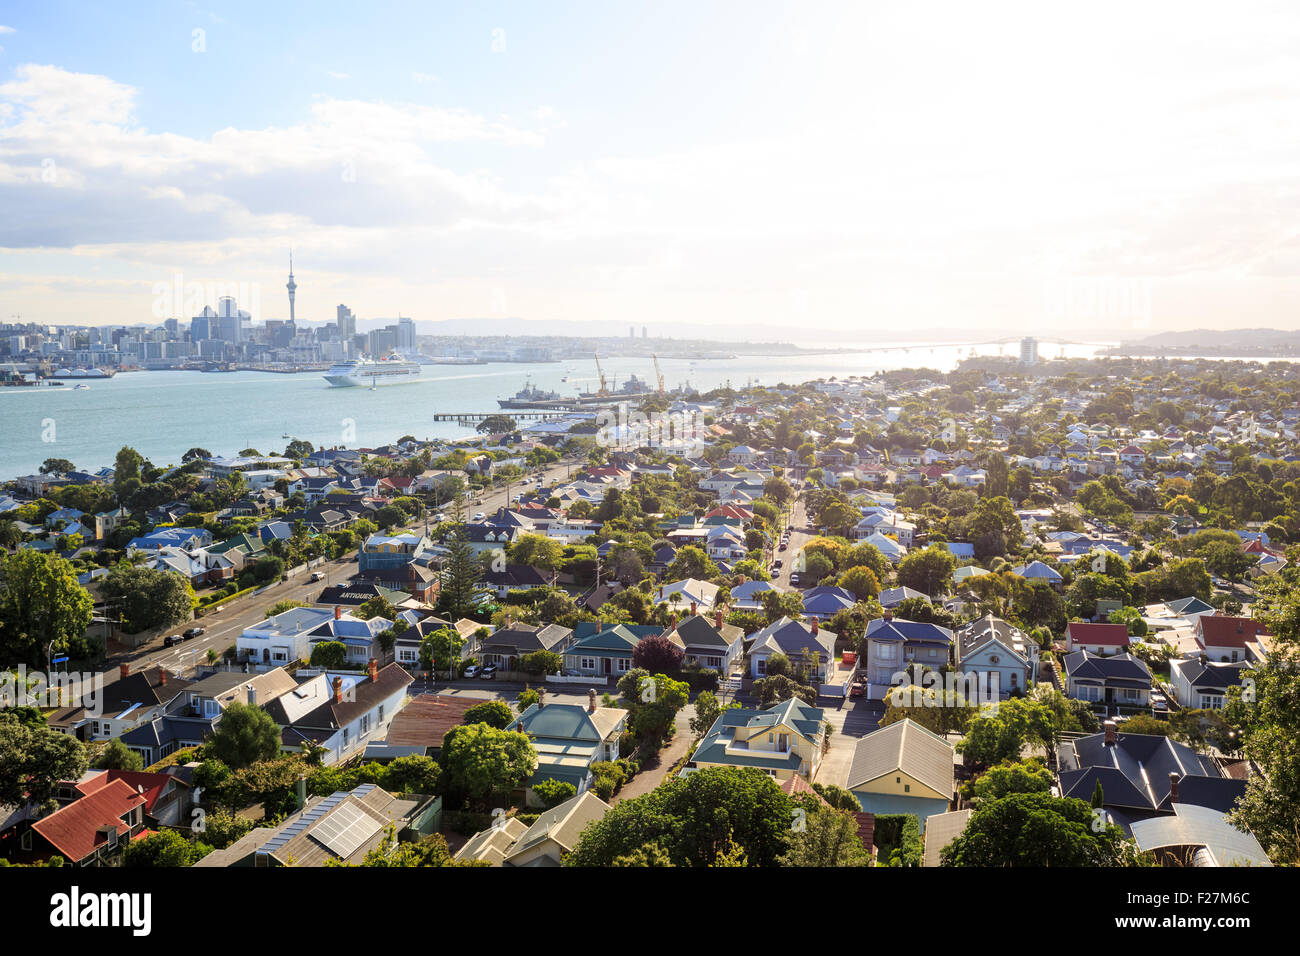 The skyline of Auckland seen from the village Devonport, New Zealand Stock Photo